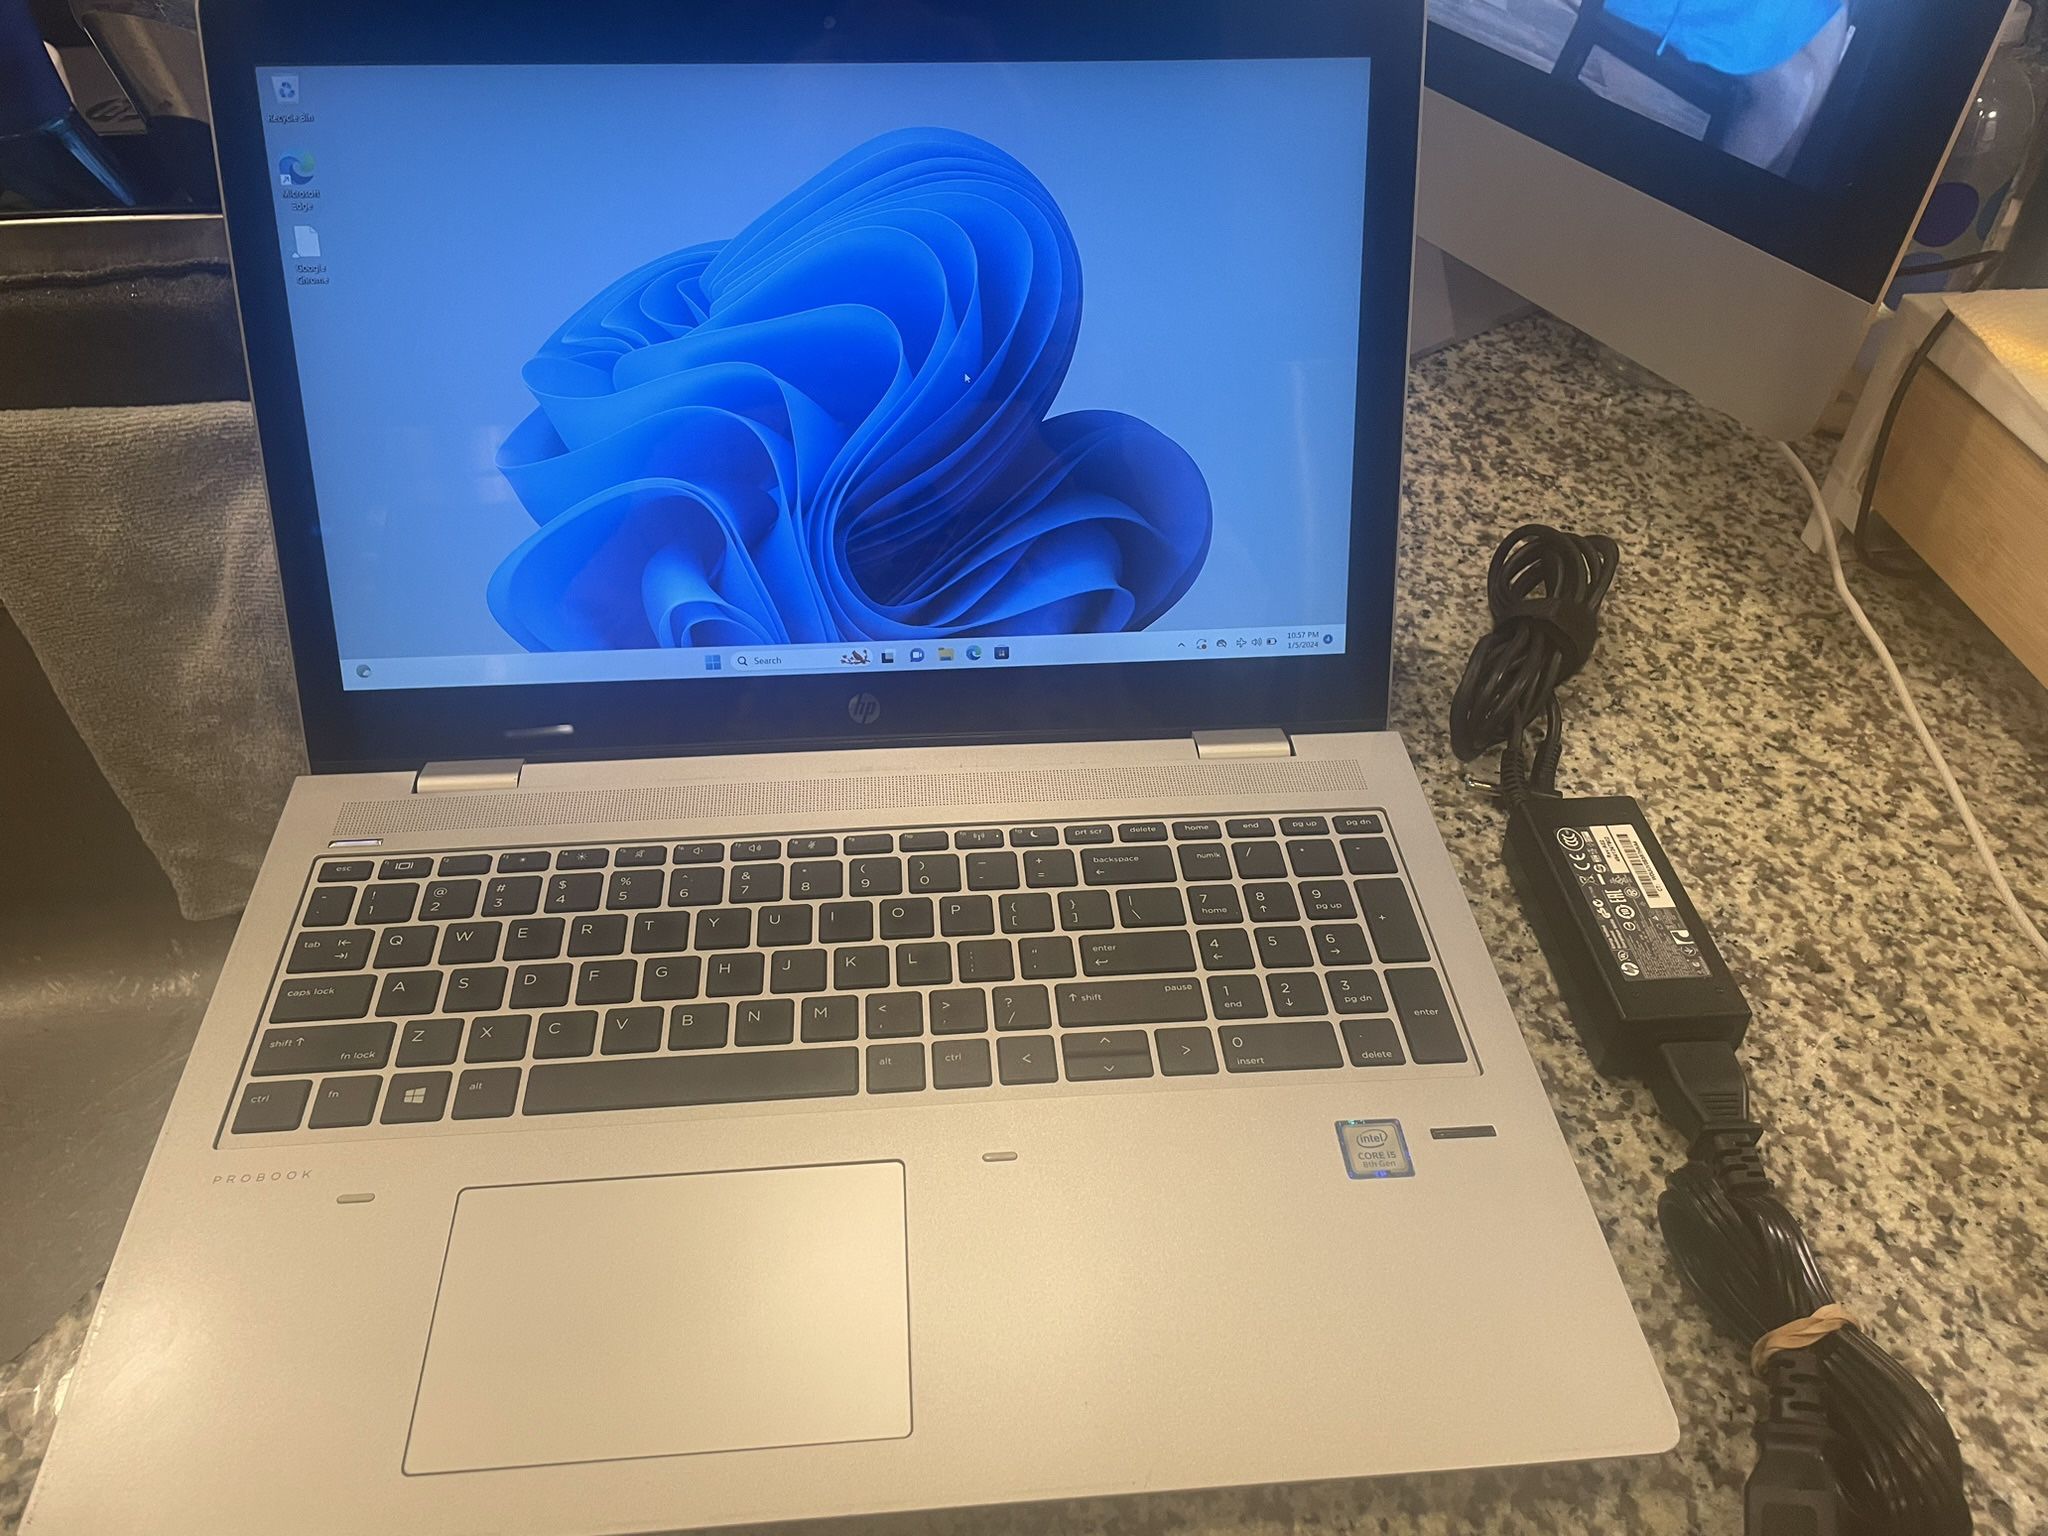 Hp Probook 650 G4 Laptop 15.4” TOUCHSCREEN 8gb Ram 128gb Ssd Intel i5 Windows 11 - Comes With Charger   Works great  Very good condition